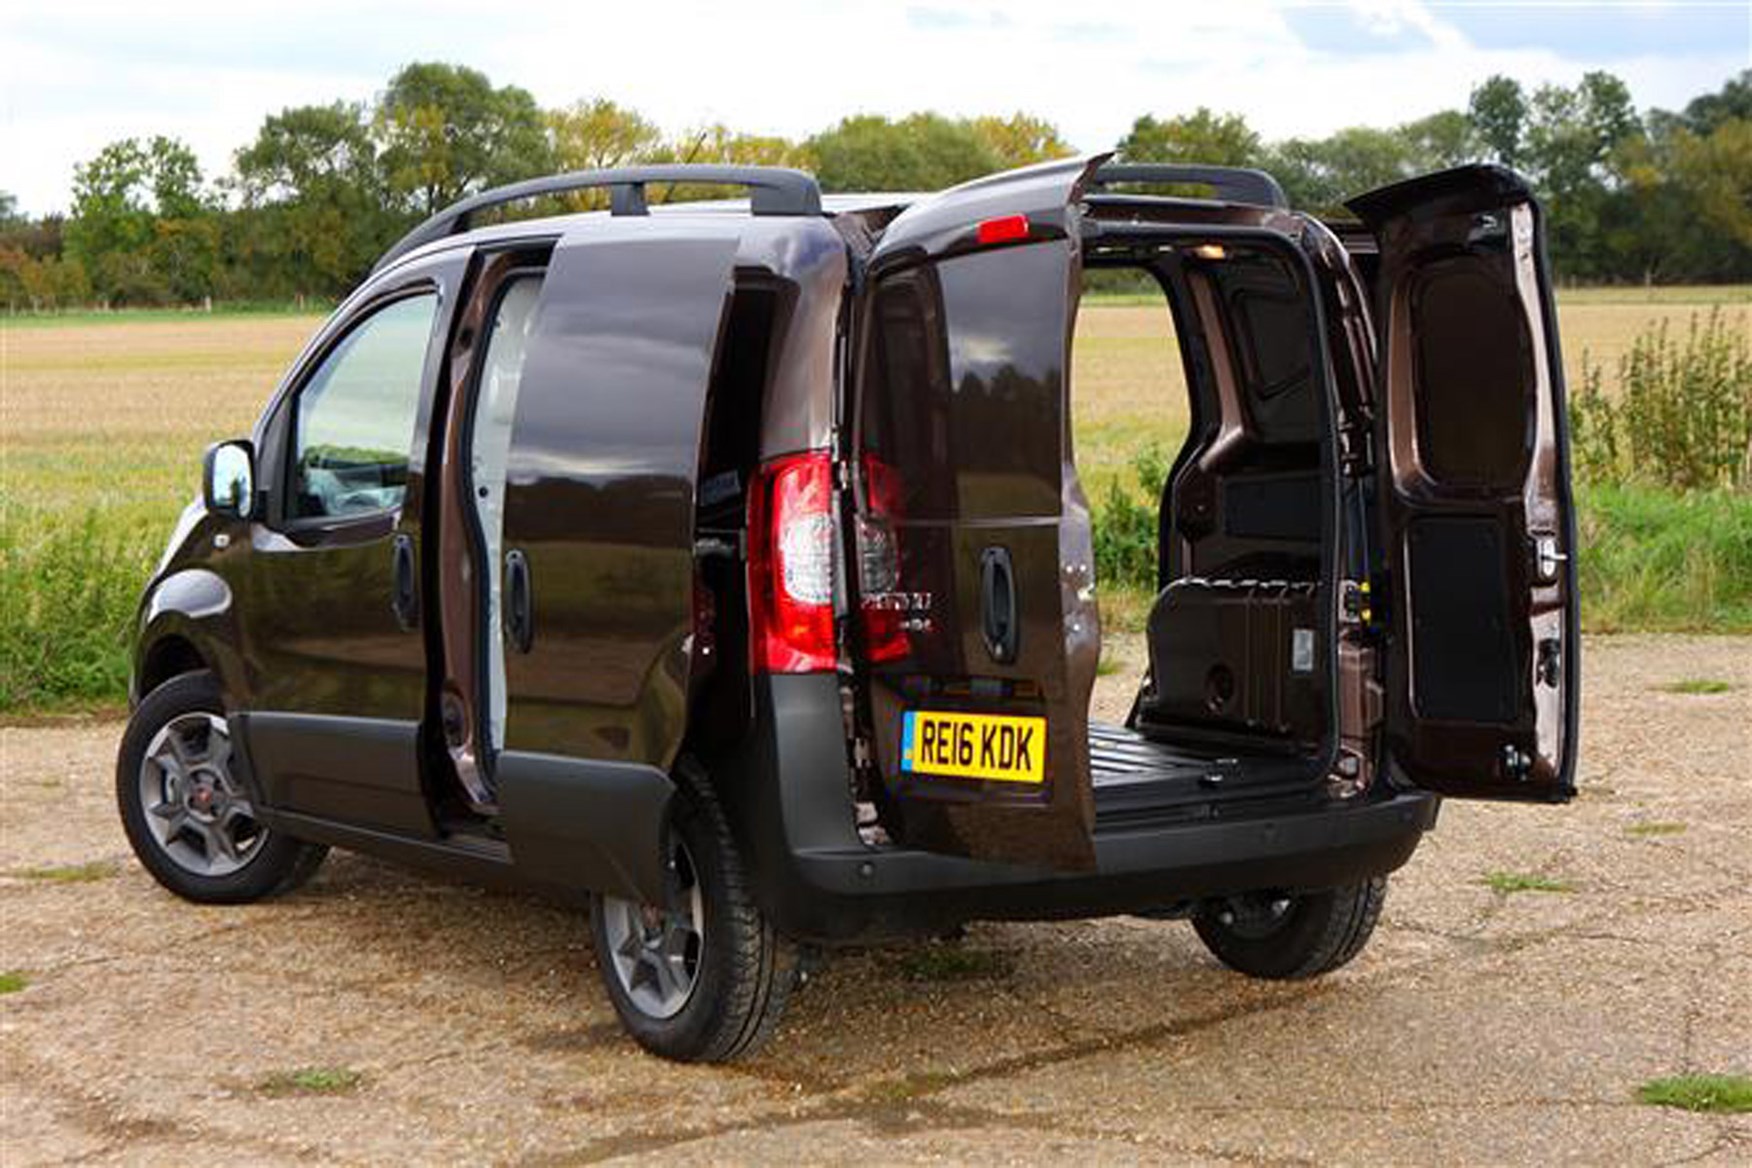 Fiat Fiorino full review on Parkers Vans - load area and payload